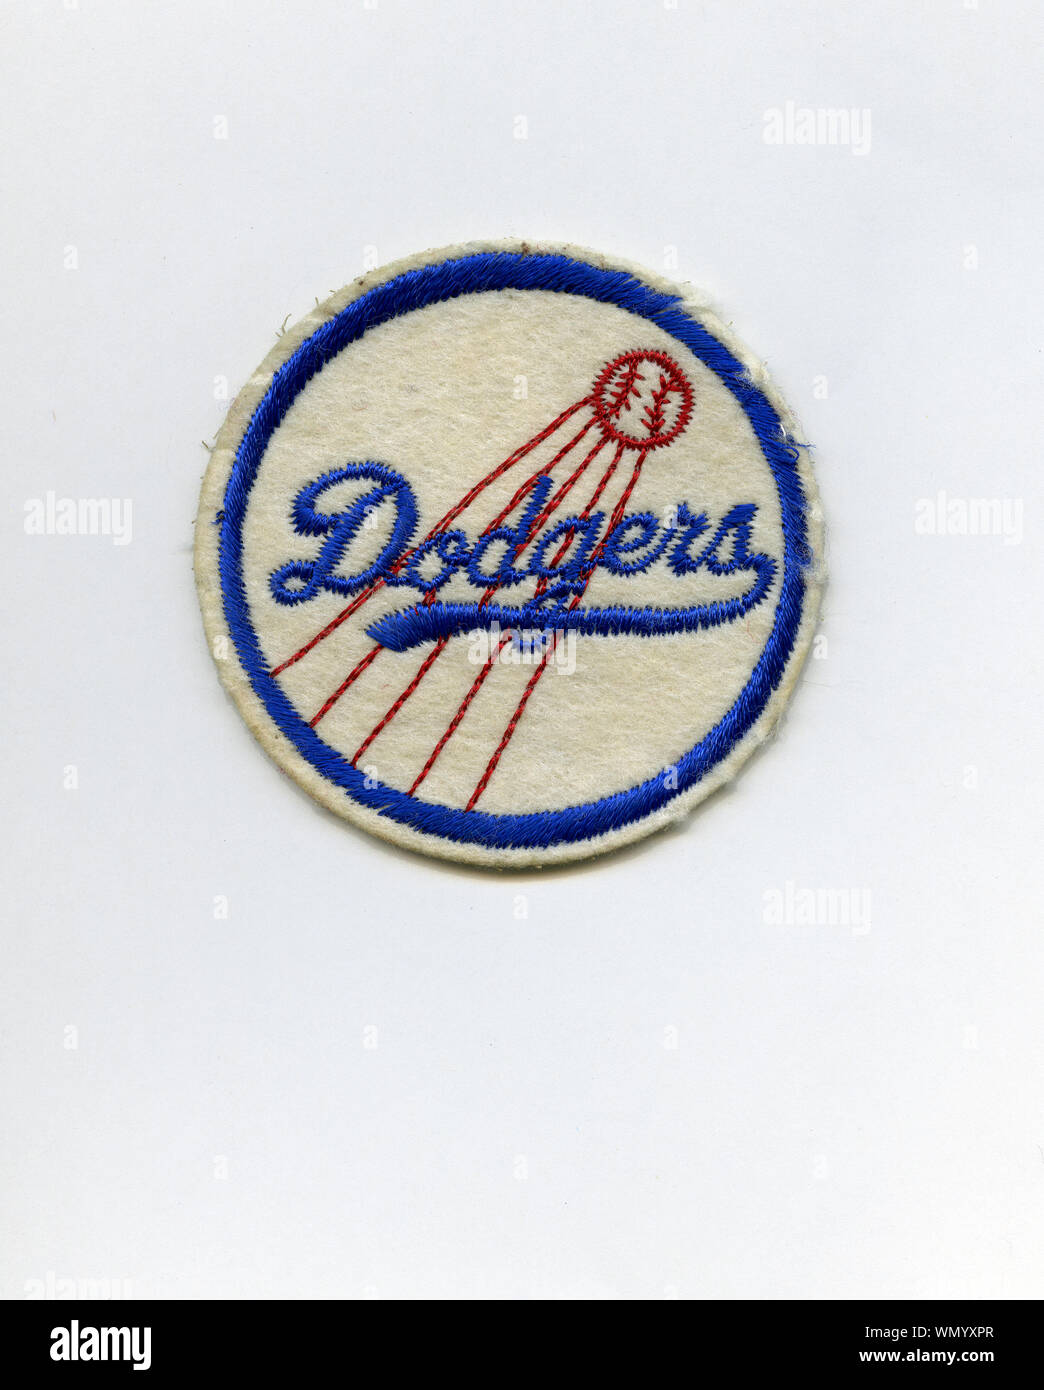 Vintage 1960's era  souvenir patch depicting the Los Angeles Dodgers iconic red, white and blue team logo design. Stock Photo